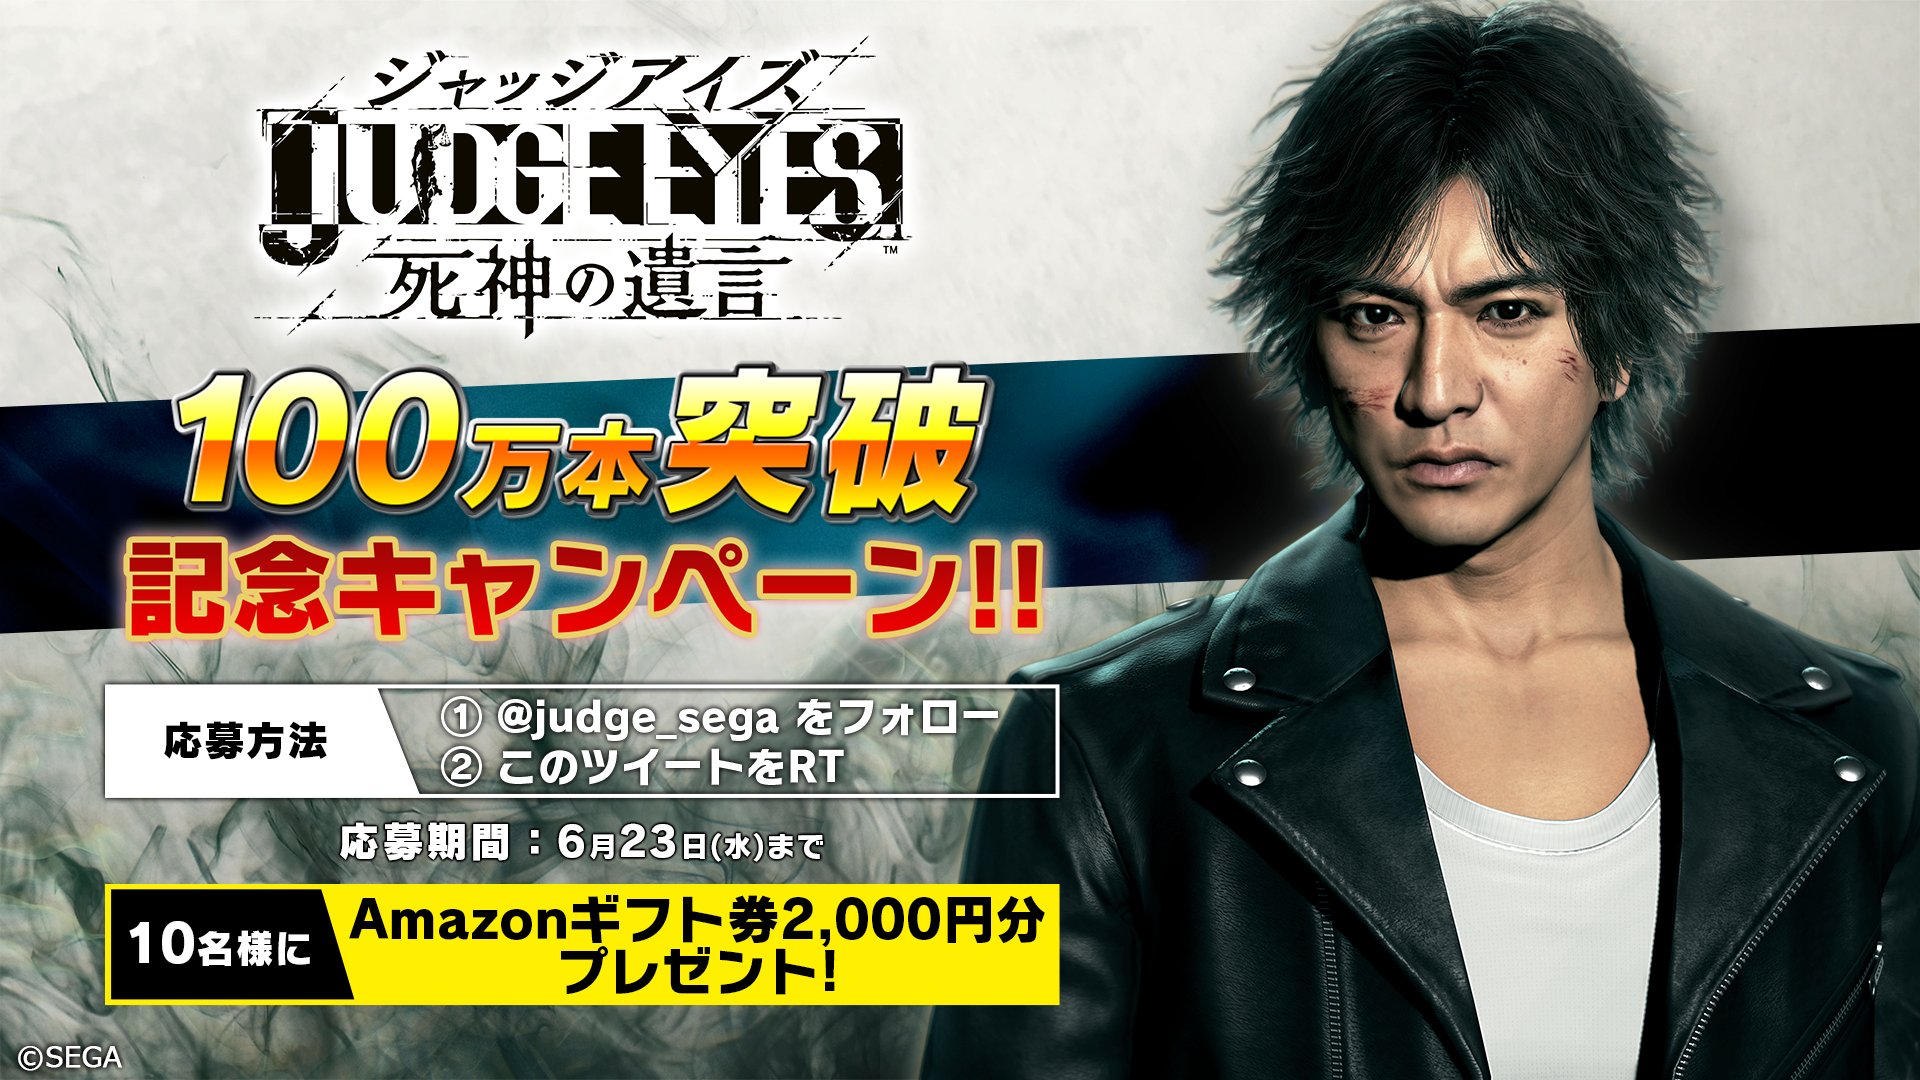 Judgment Worldwide Shipments and Digital Sales Top One Million Copies